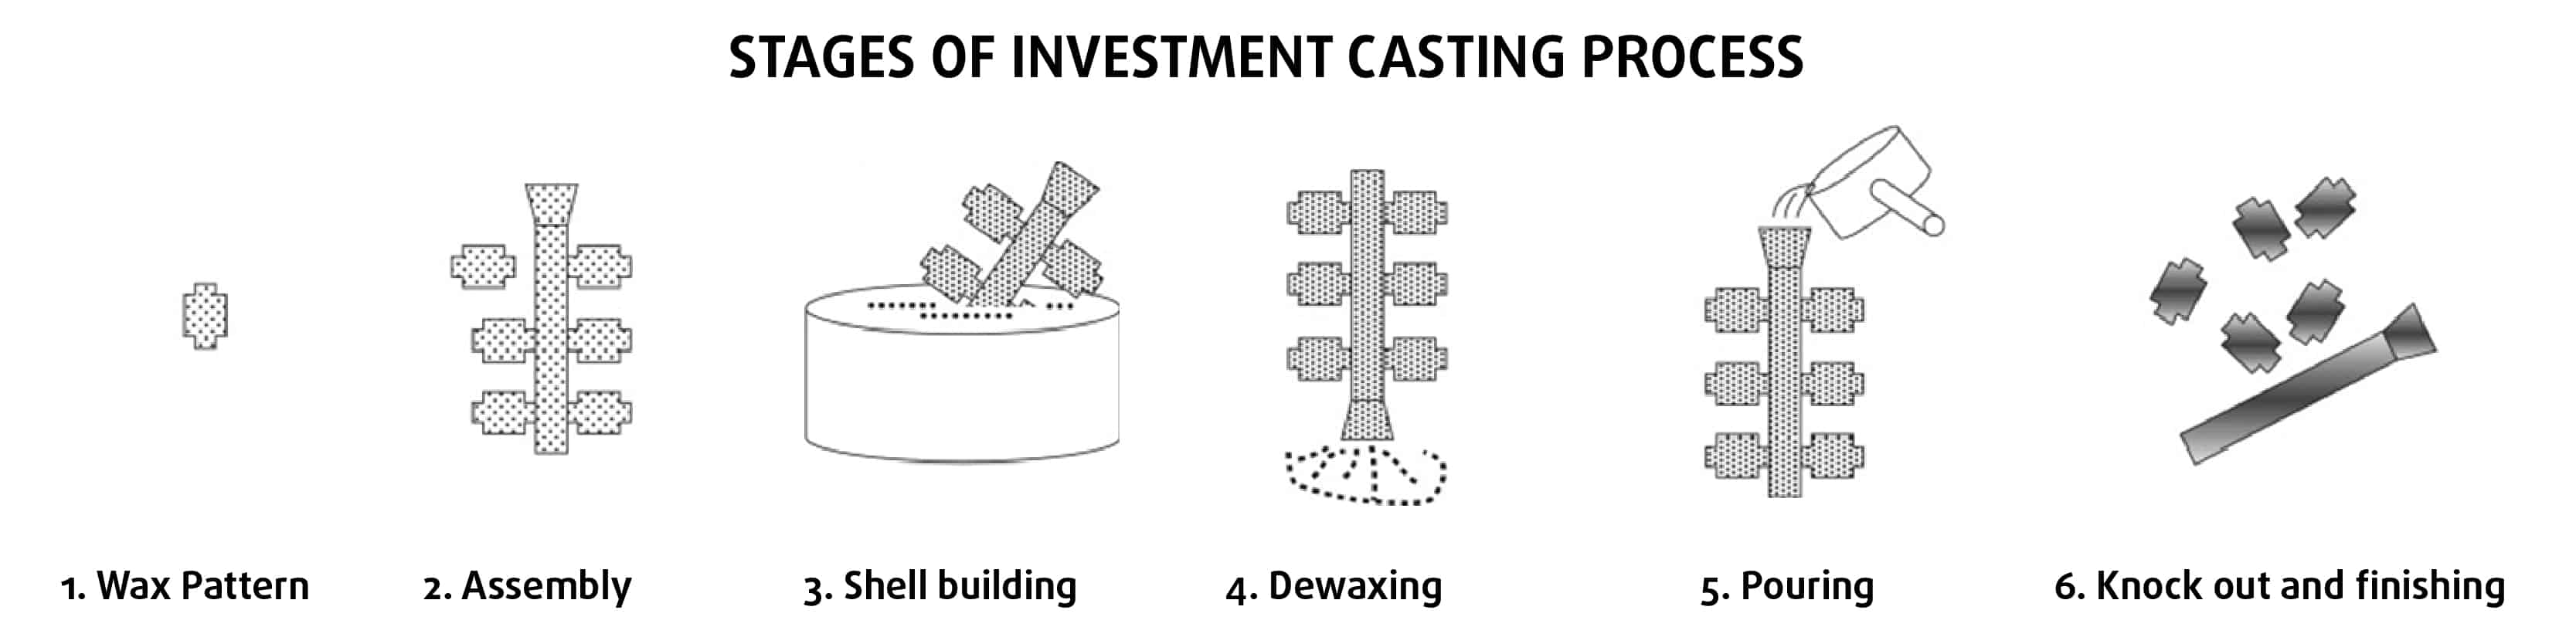 stages of investment casting process-01